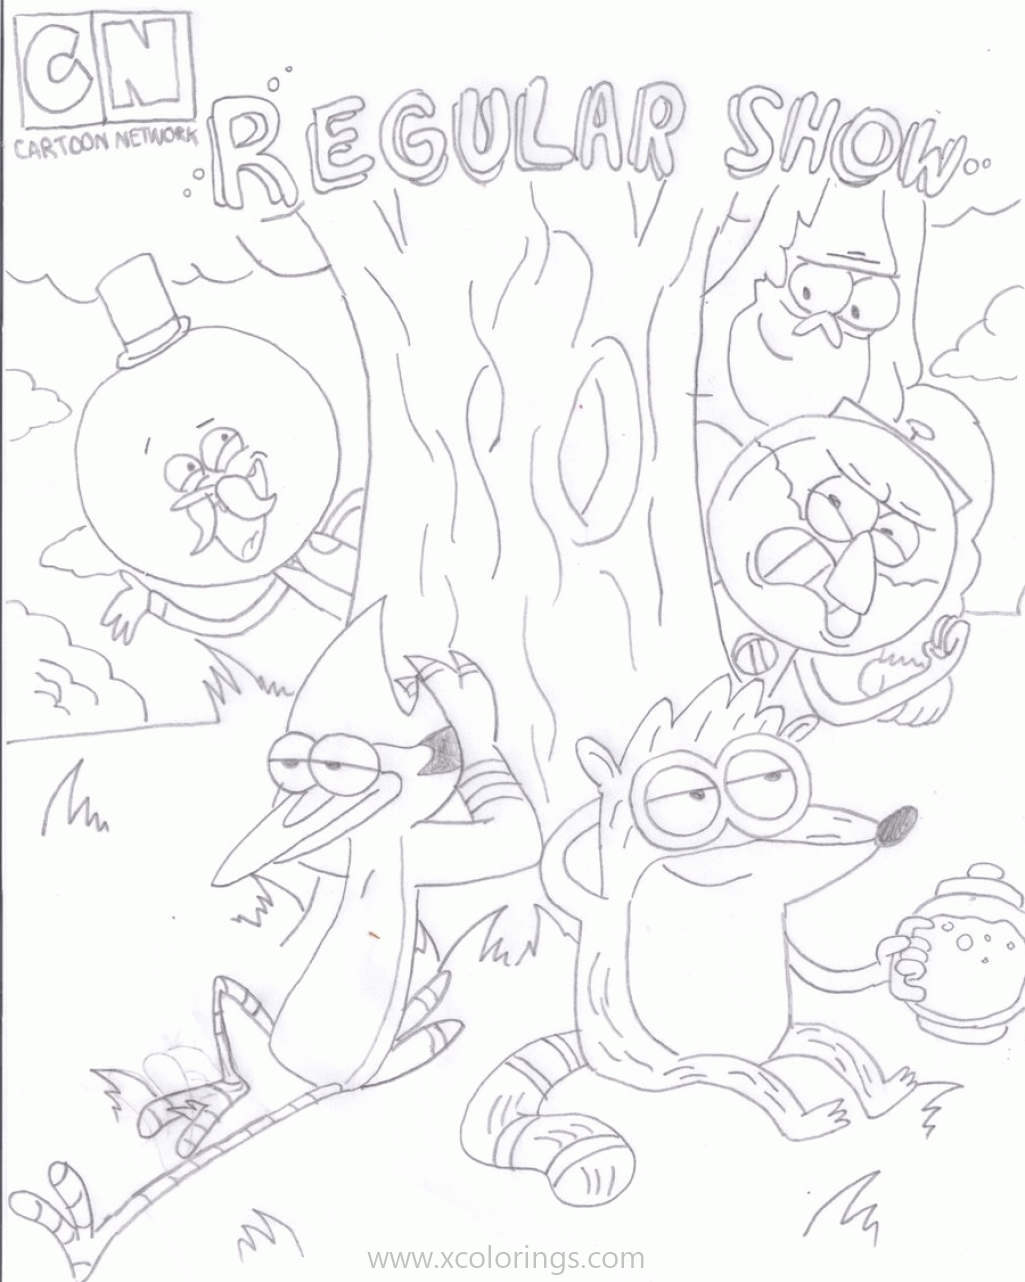 Free Regular Show Coloring Pages Characters printable